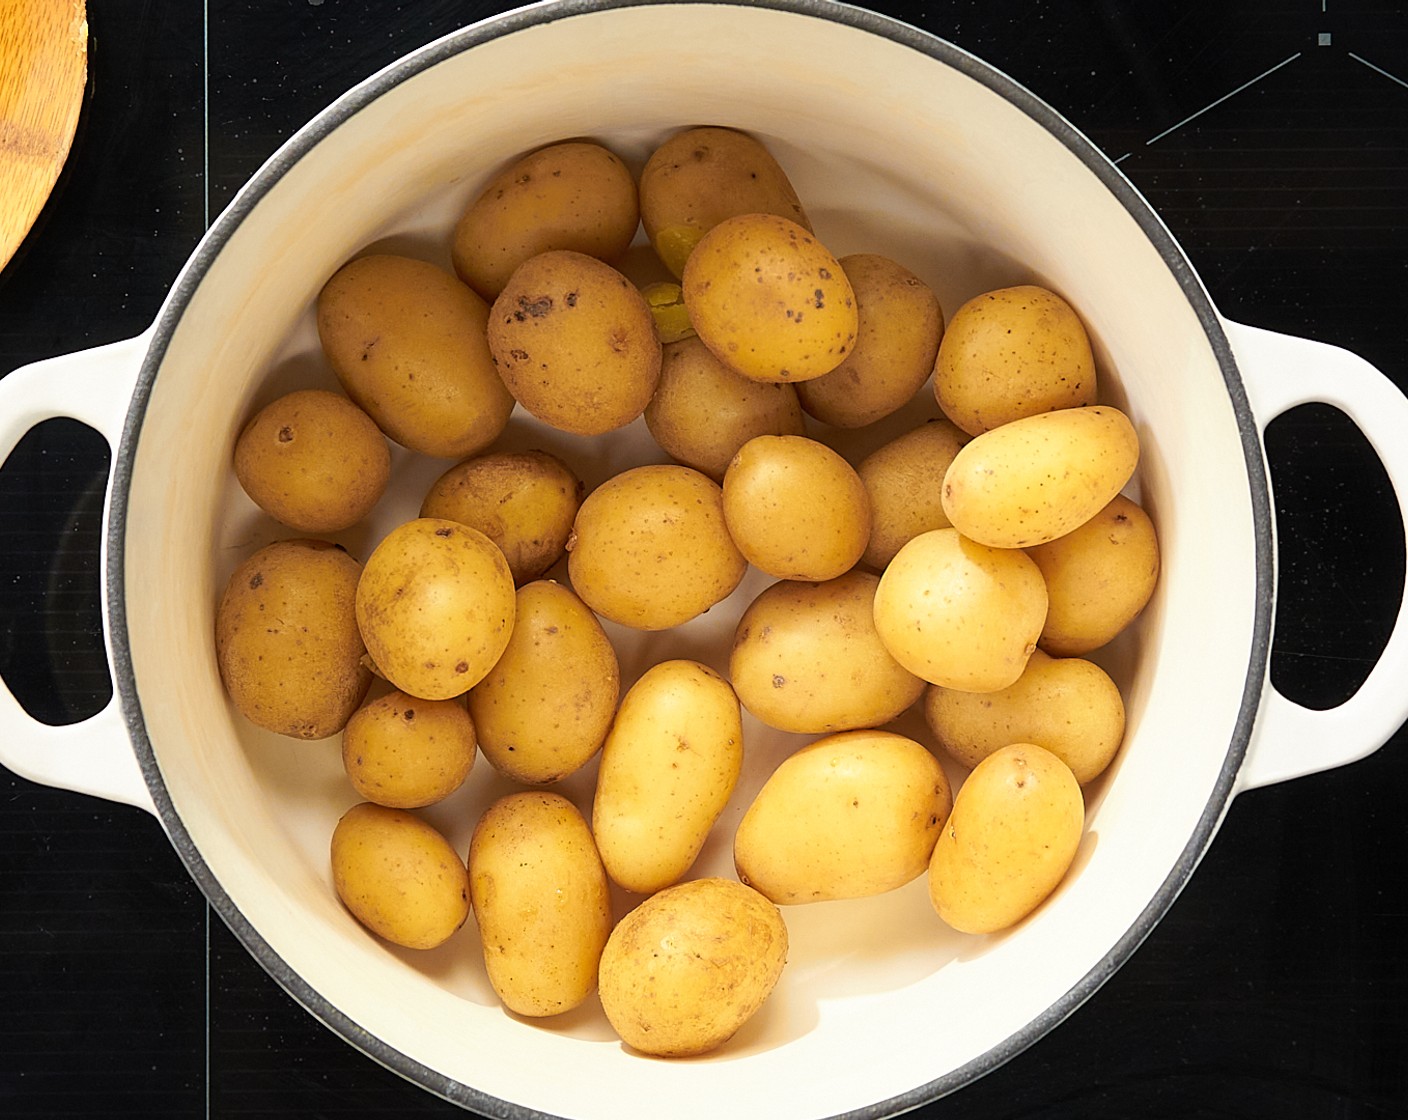 step 3 Potatoes are cooked when you can easily pierce them with a fork. Once cooked, drain the potatoes and add them back to the hot empty pot to help them dry out.